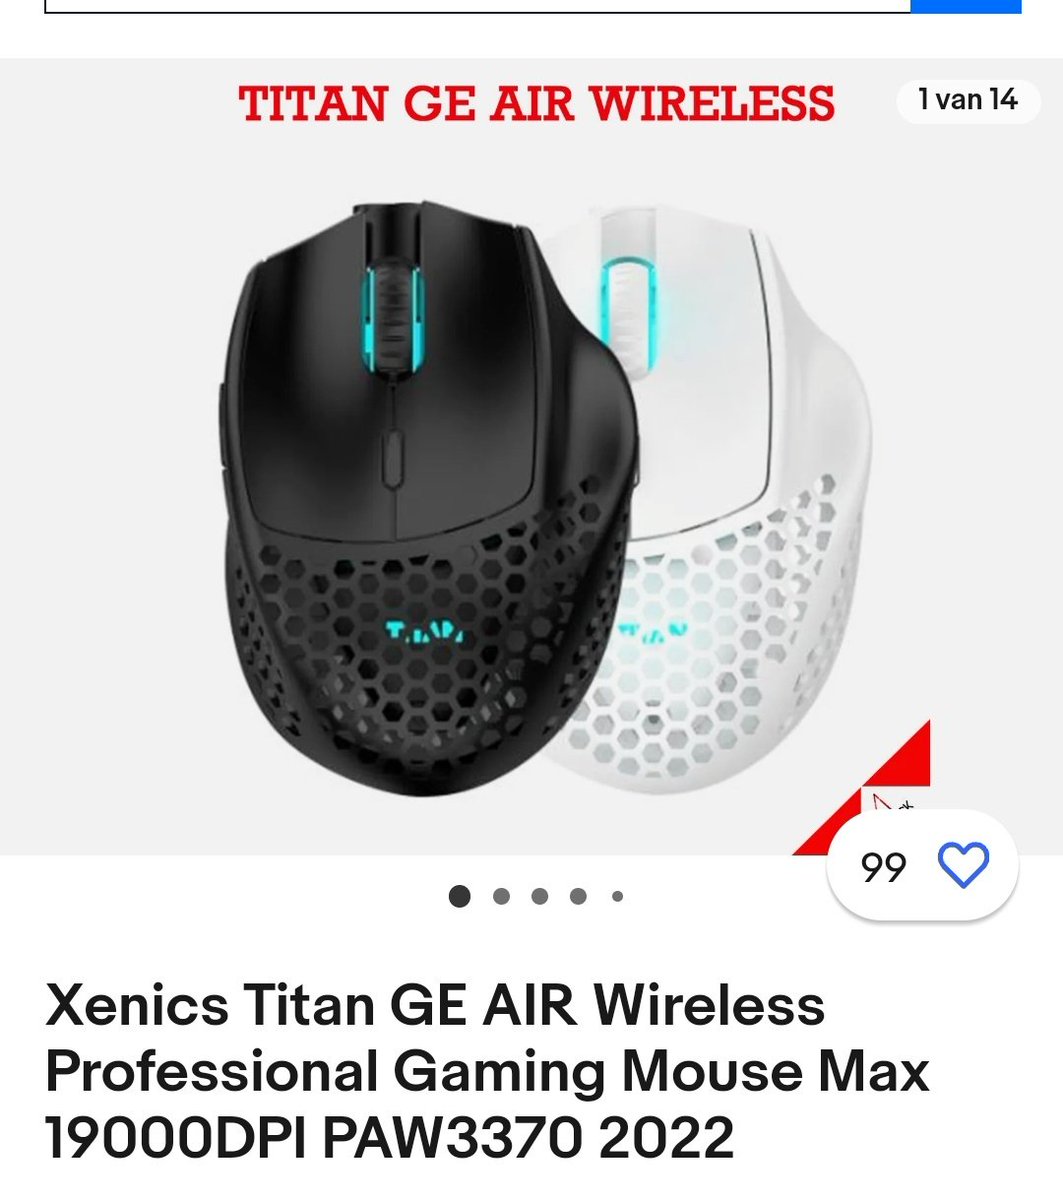 I need this (wireless mm720)